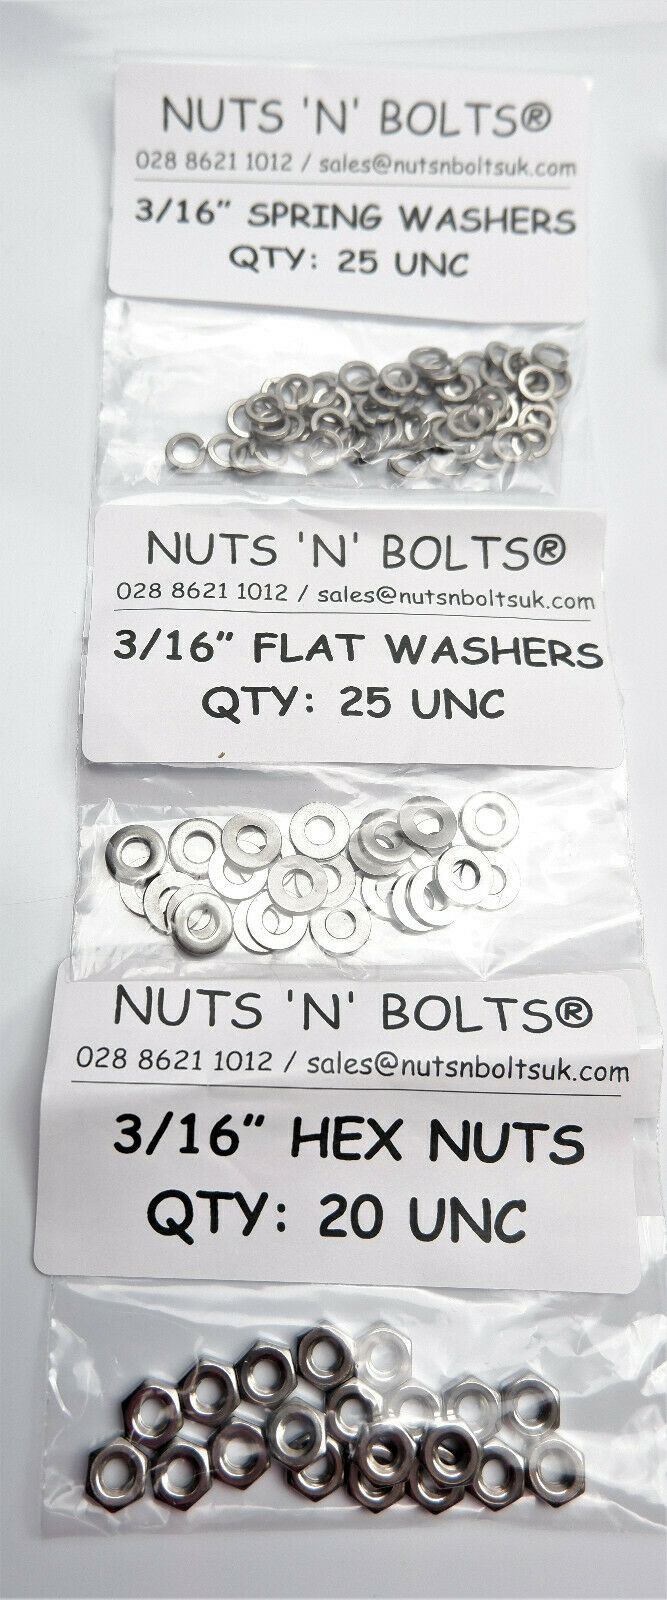 UNF 450+ Stainless Steel Hex Bolts, Nyloc Nuts & Washer Assorted Pack Kit A2